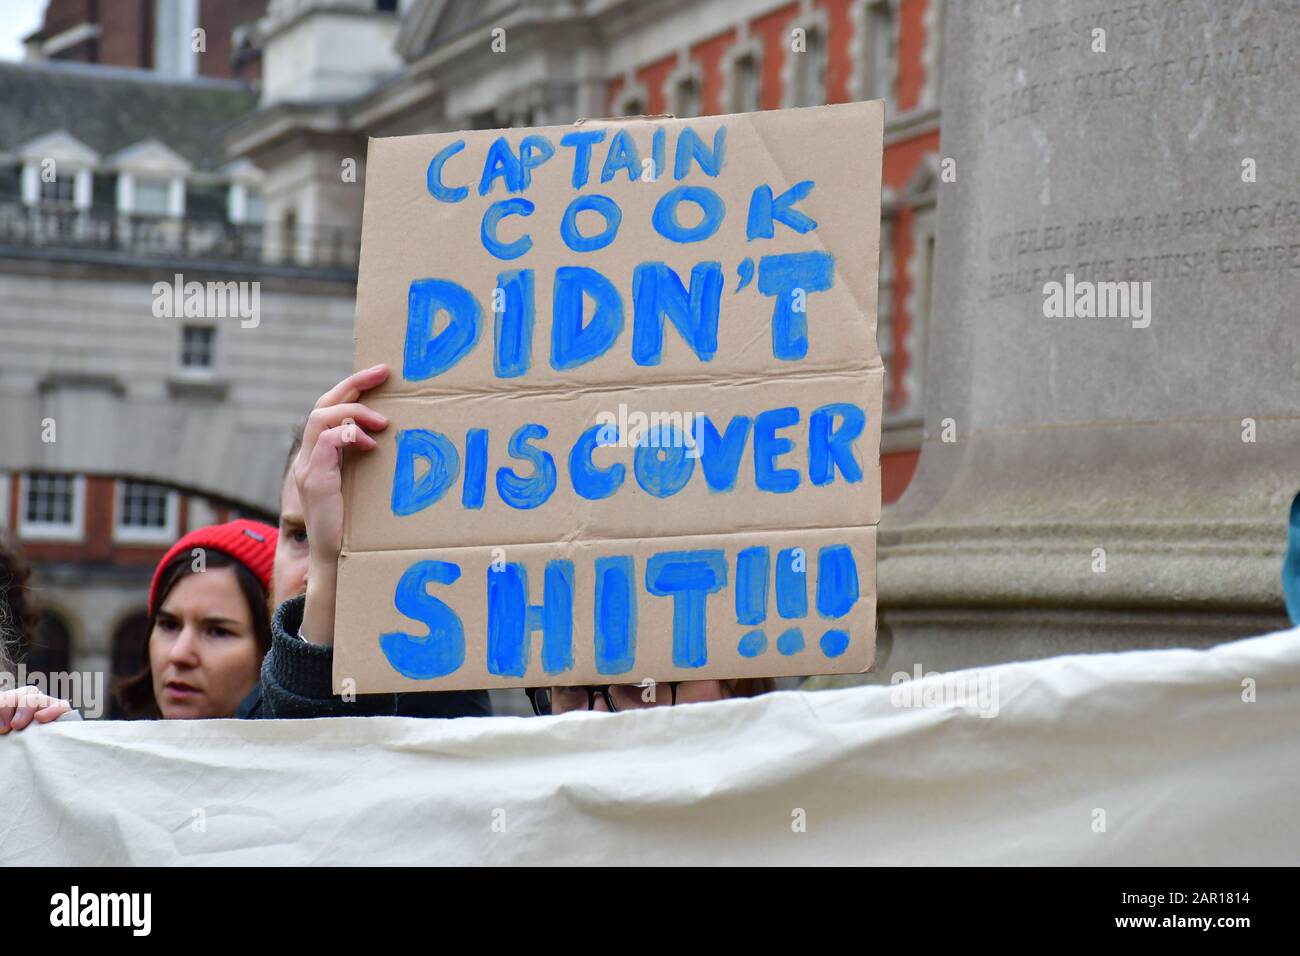 Captain Cook statue, London, UK.  25th January 2020. Activists Protest to Abolish Australia Day, to celebrated the invasion of Australia and the cruel brutality against the Aboriginal people continues through this day at Captain Cook statue on 25th January 2020, in London, UK. Credit: Picture Capital/Alamy Live News Stock Photo